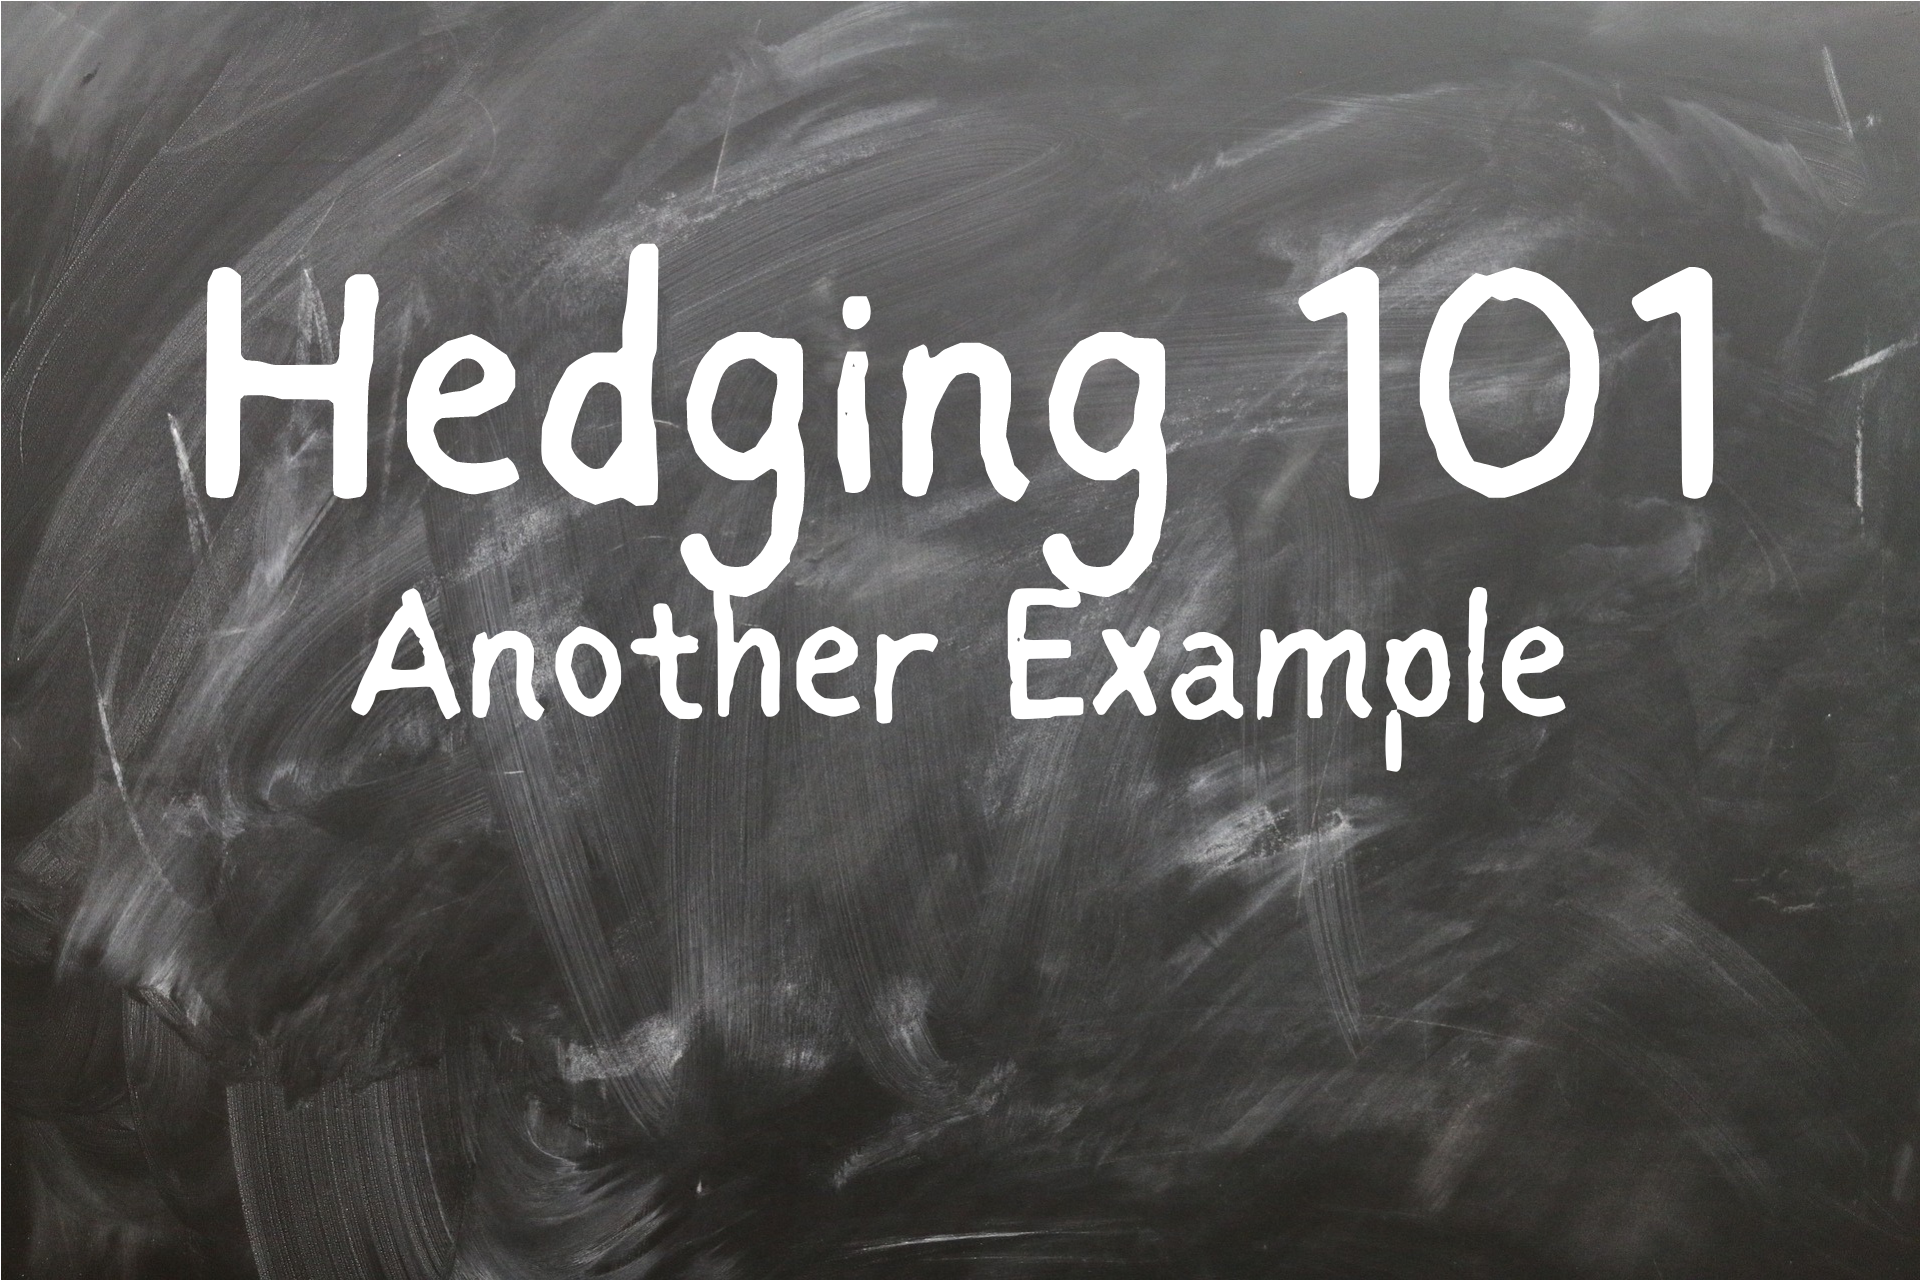 image of a chalkboard with Hedging 101 written in white and Another Example written underneath